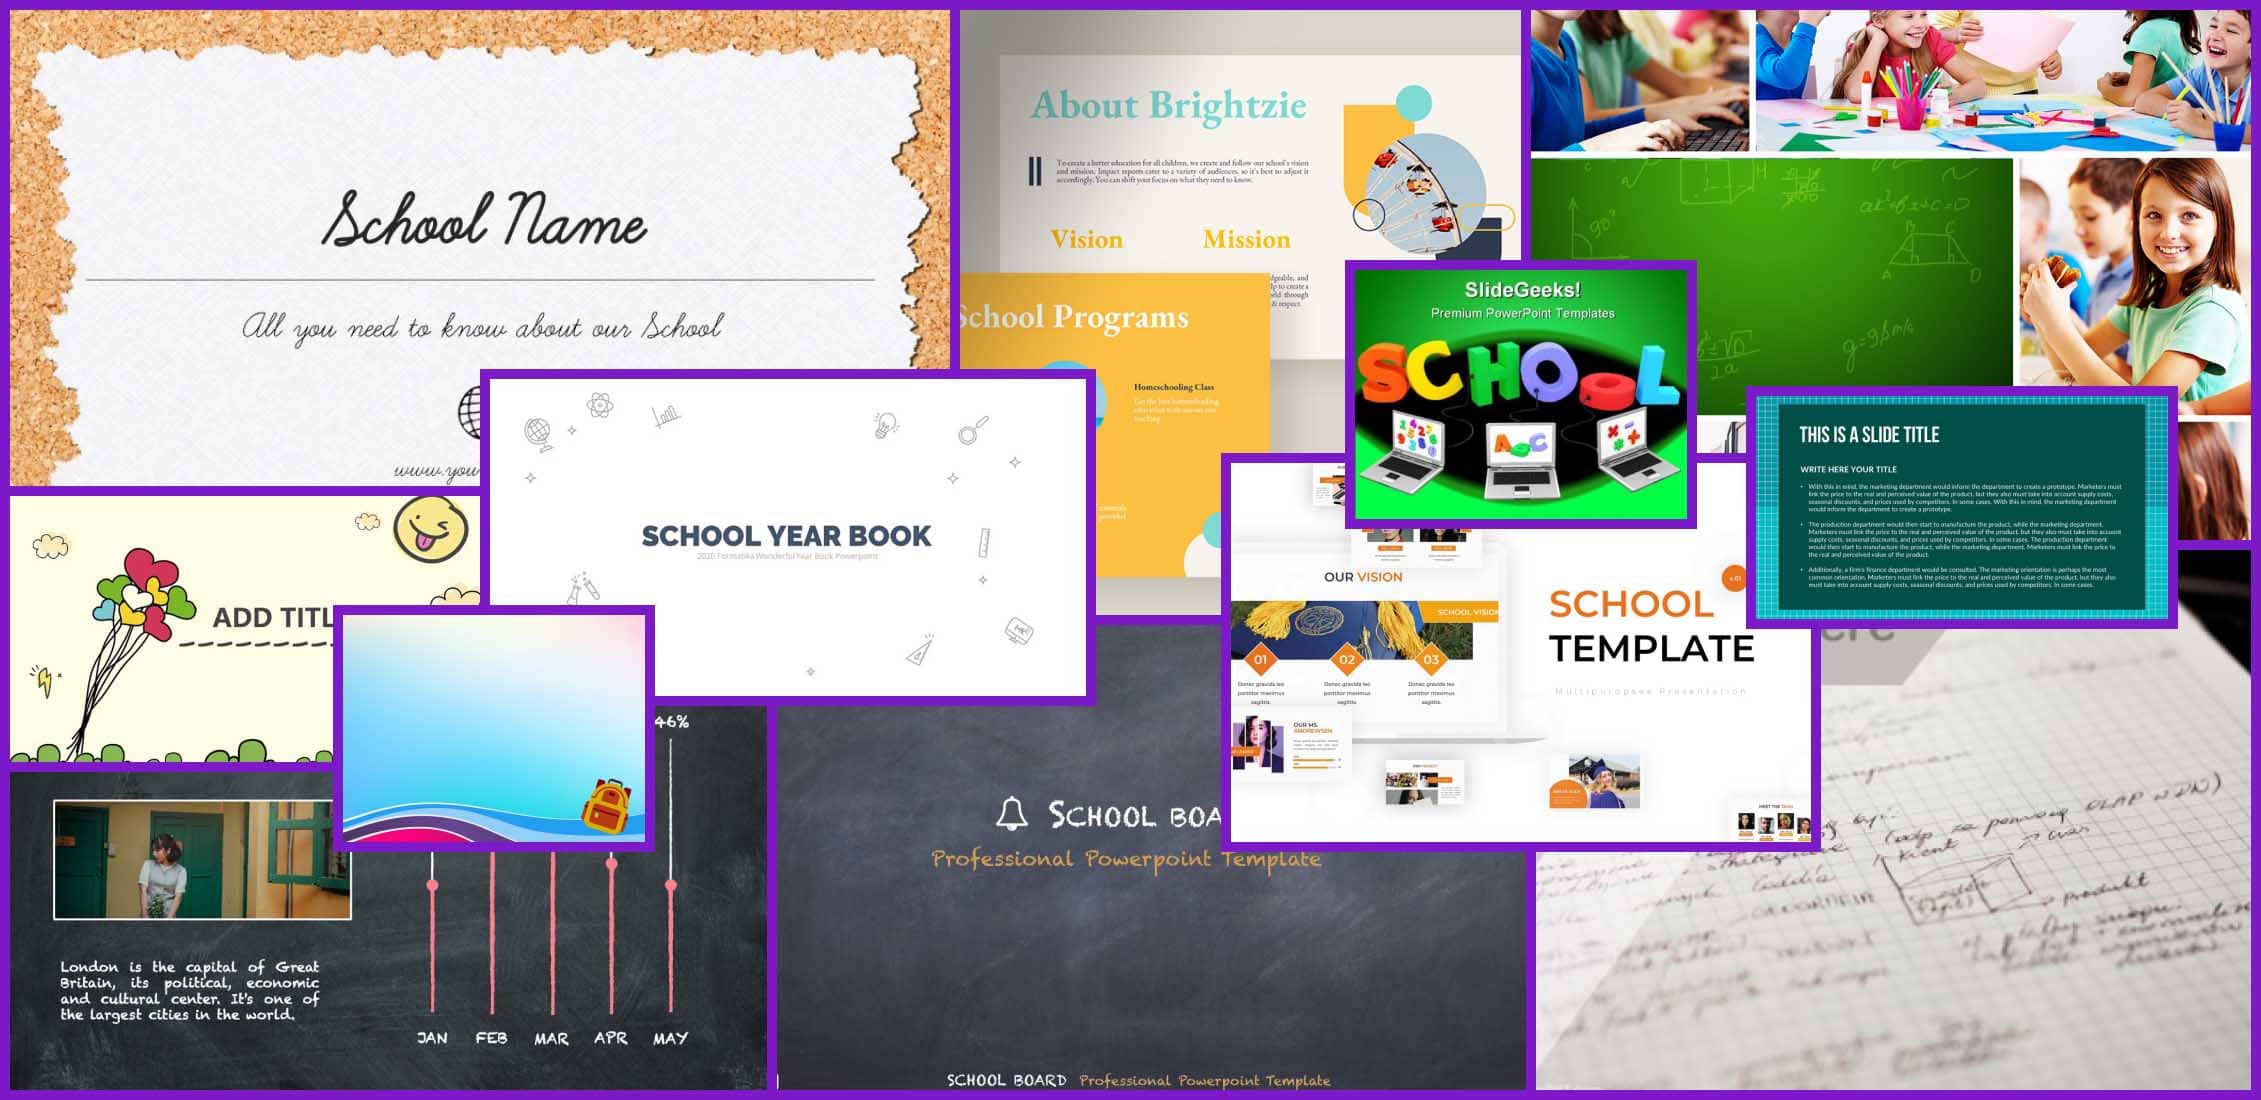 Best PowerPoint Templates for School Example.